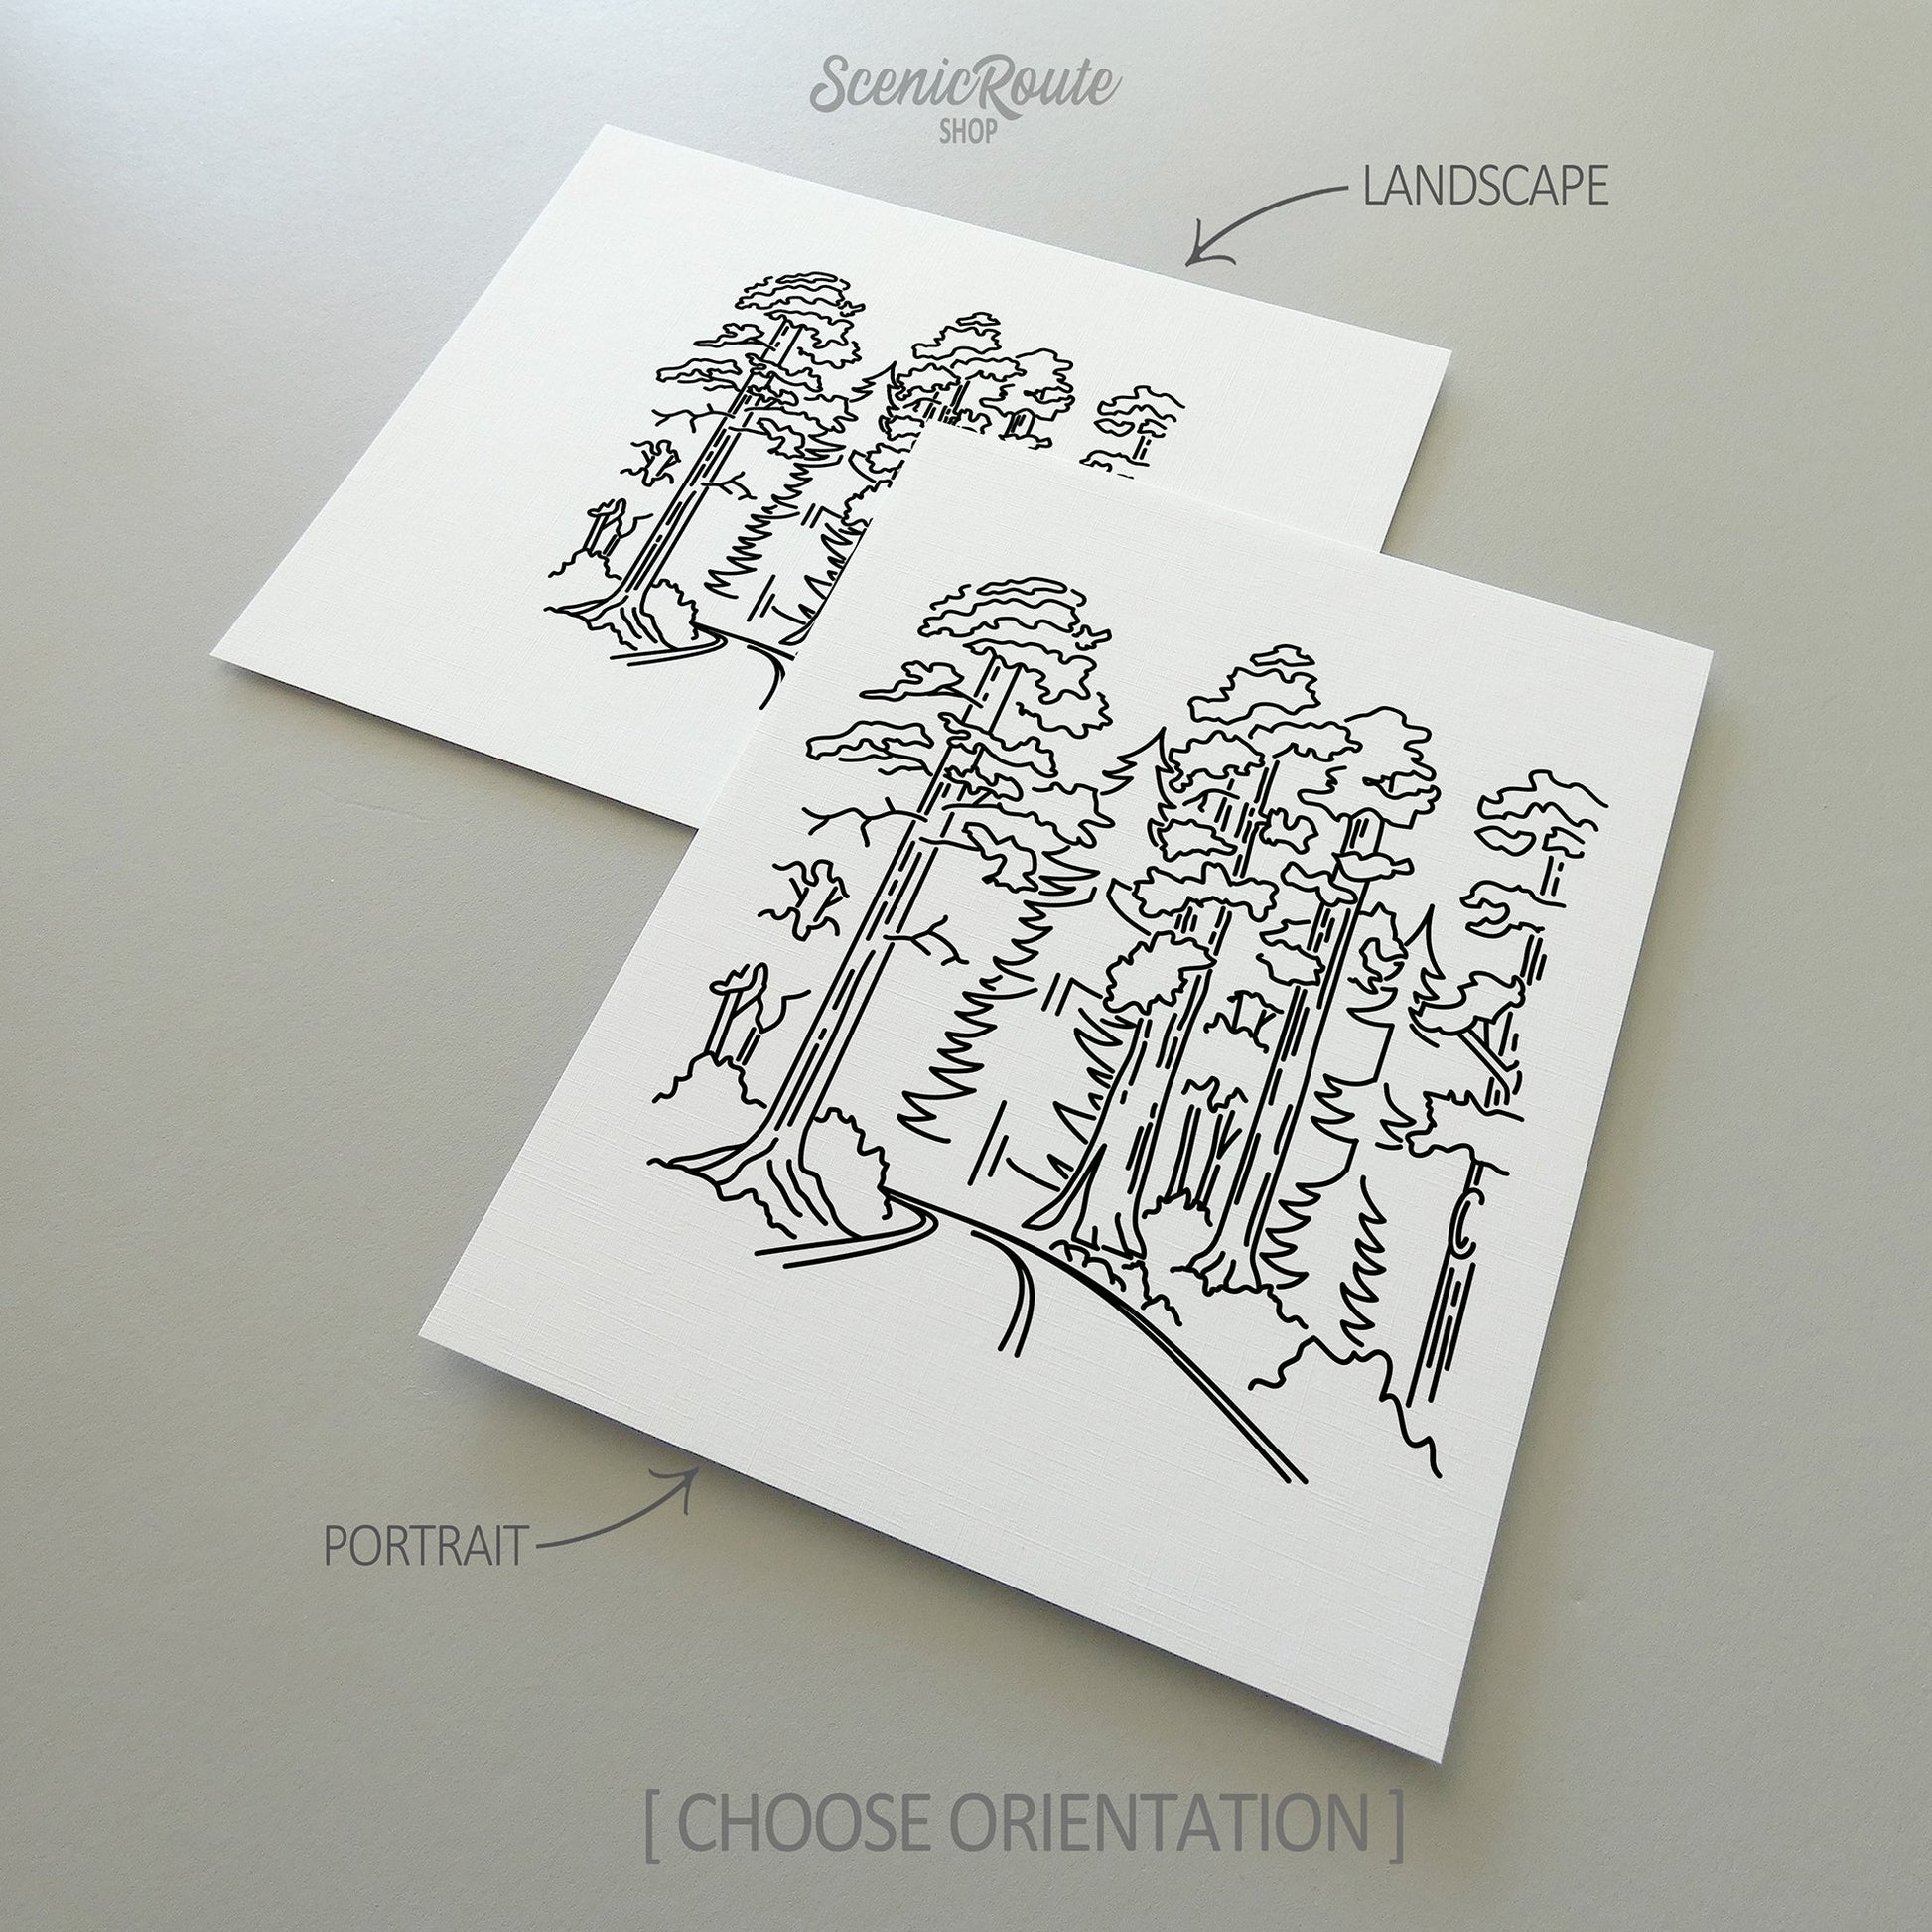 Two line art drawings of Redwood National Park on white linen paper with a gray background.  The pieces are shown in portrait and landscape orientation for the available art print options.